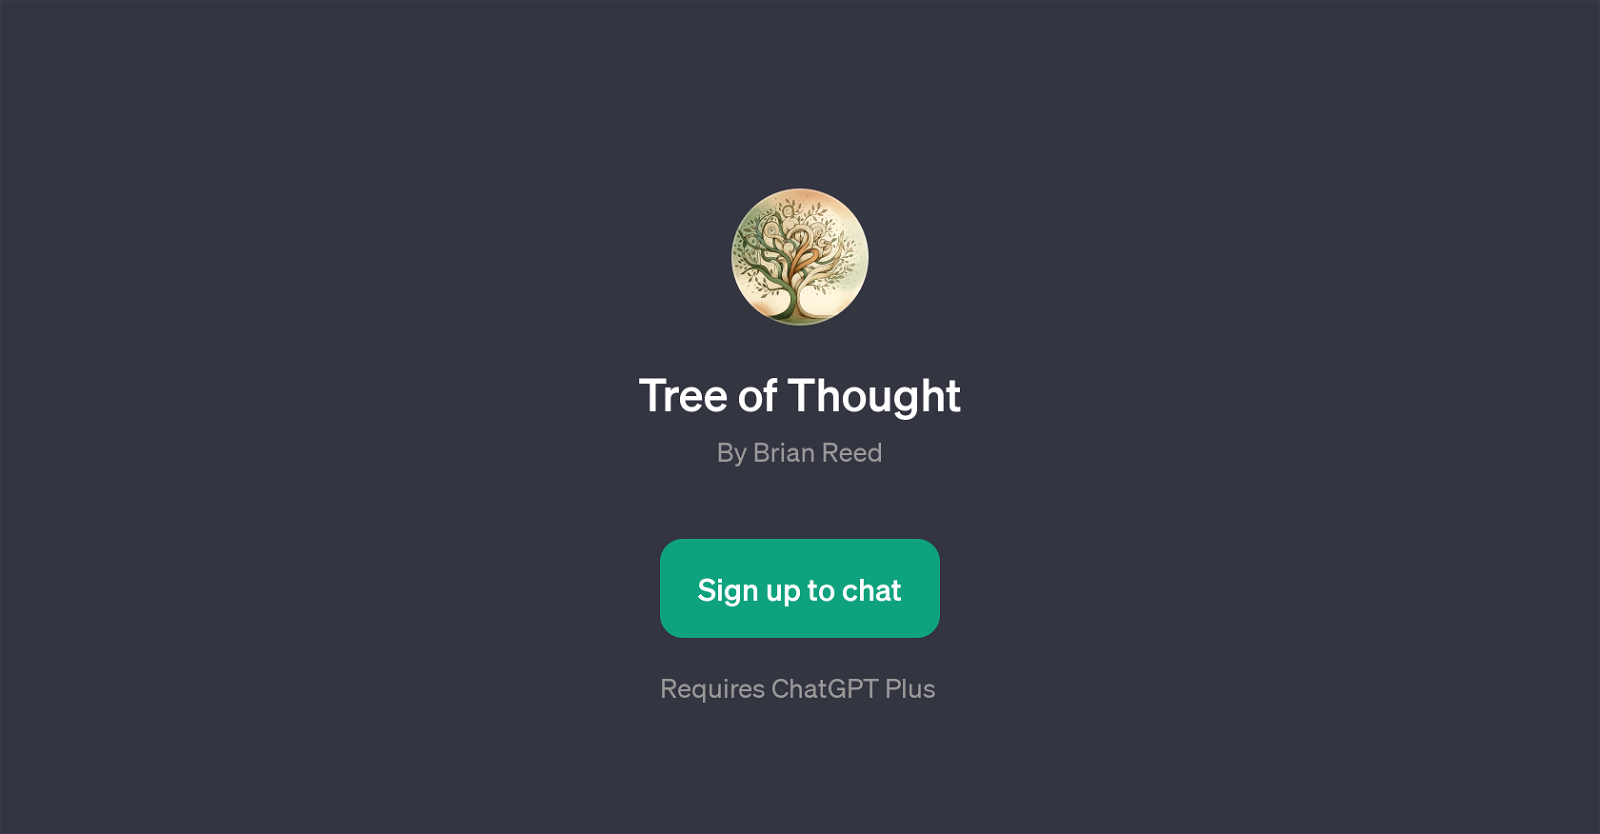 Tree of Thought website